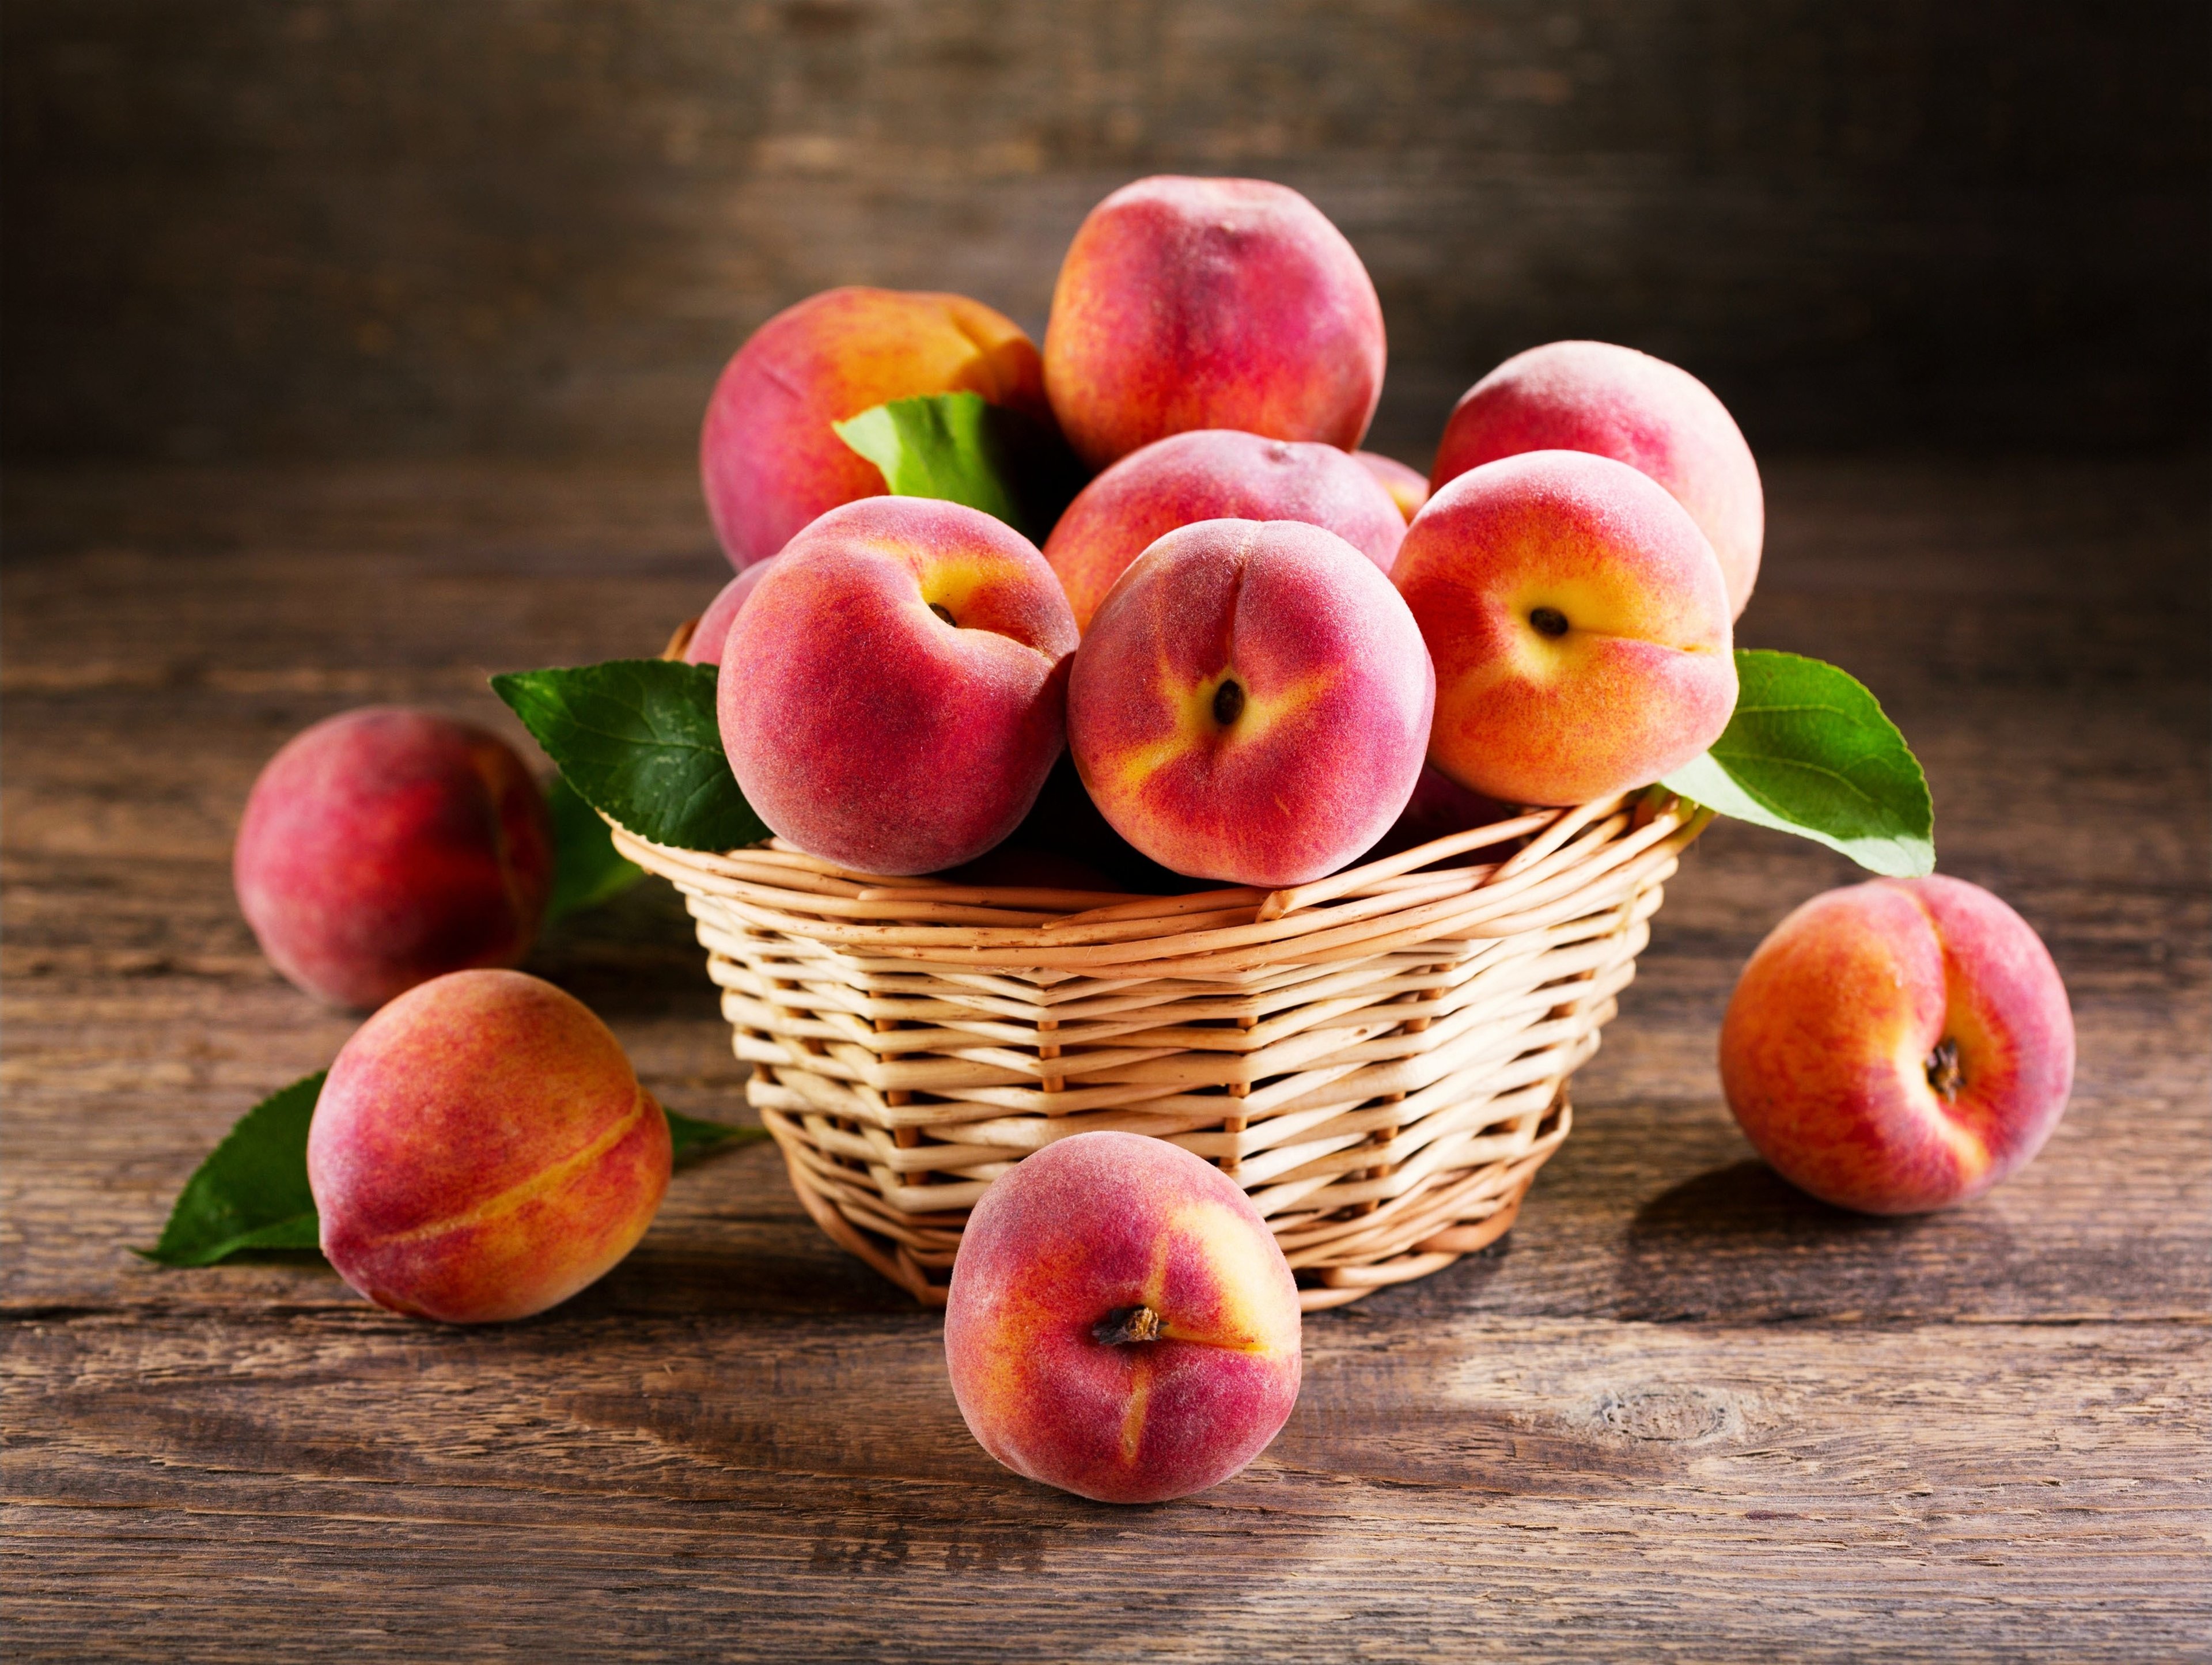 peaches, table, delicious, summer, fruits, fresh, basket, food